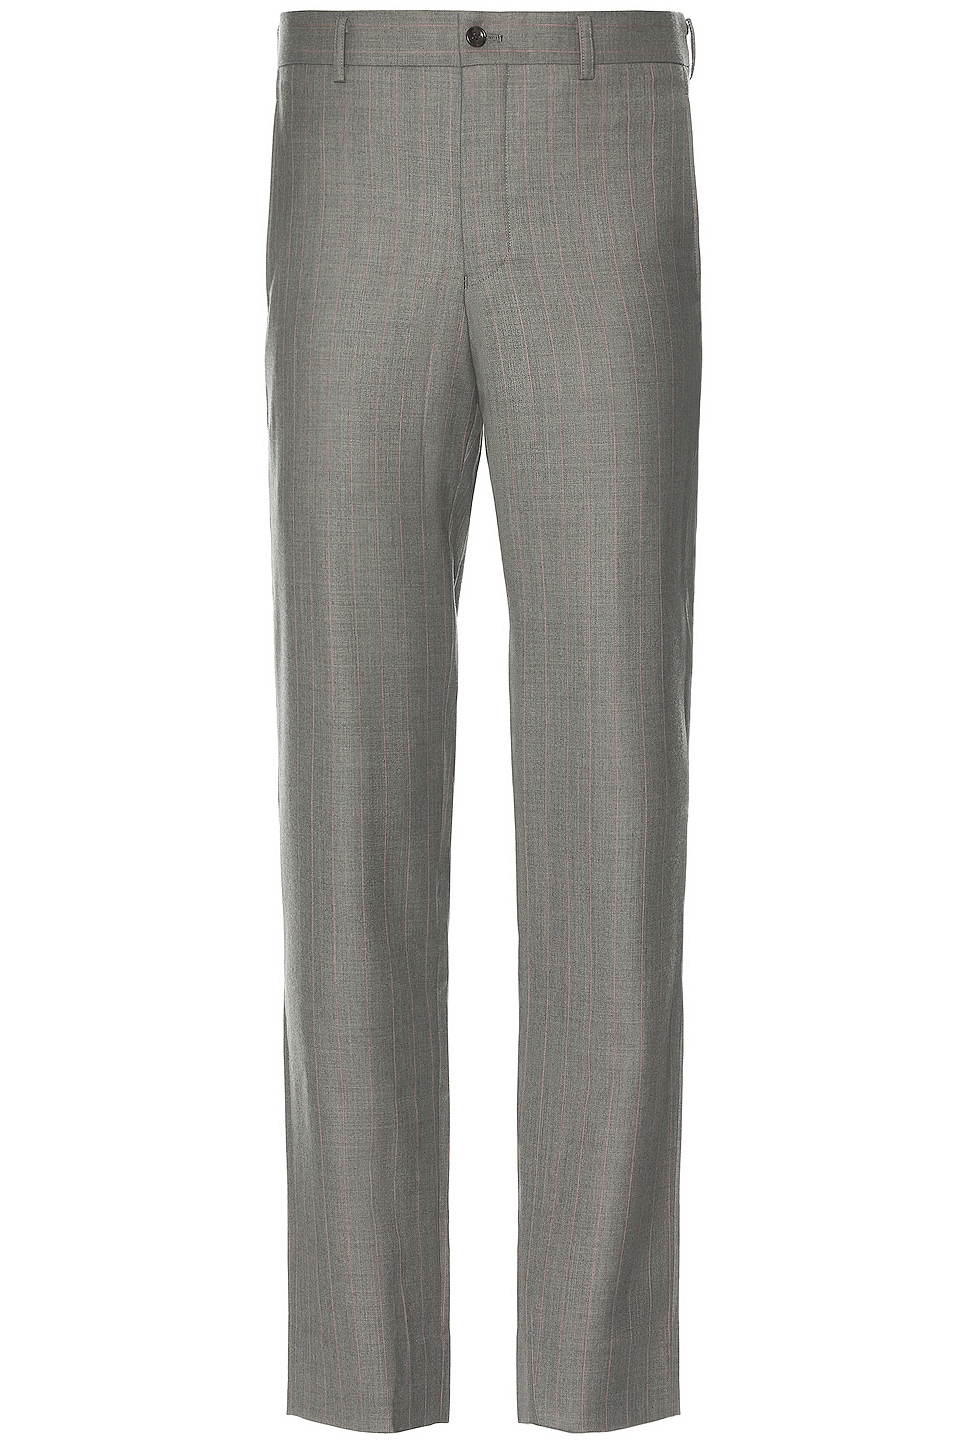 Image 1 of COMME des GARCONS Homme Plus Pencil Striped Pant in Grey & Pink